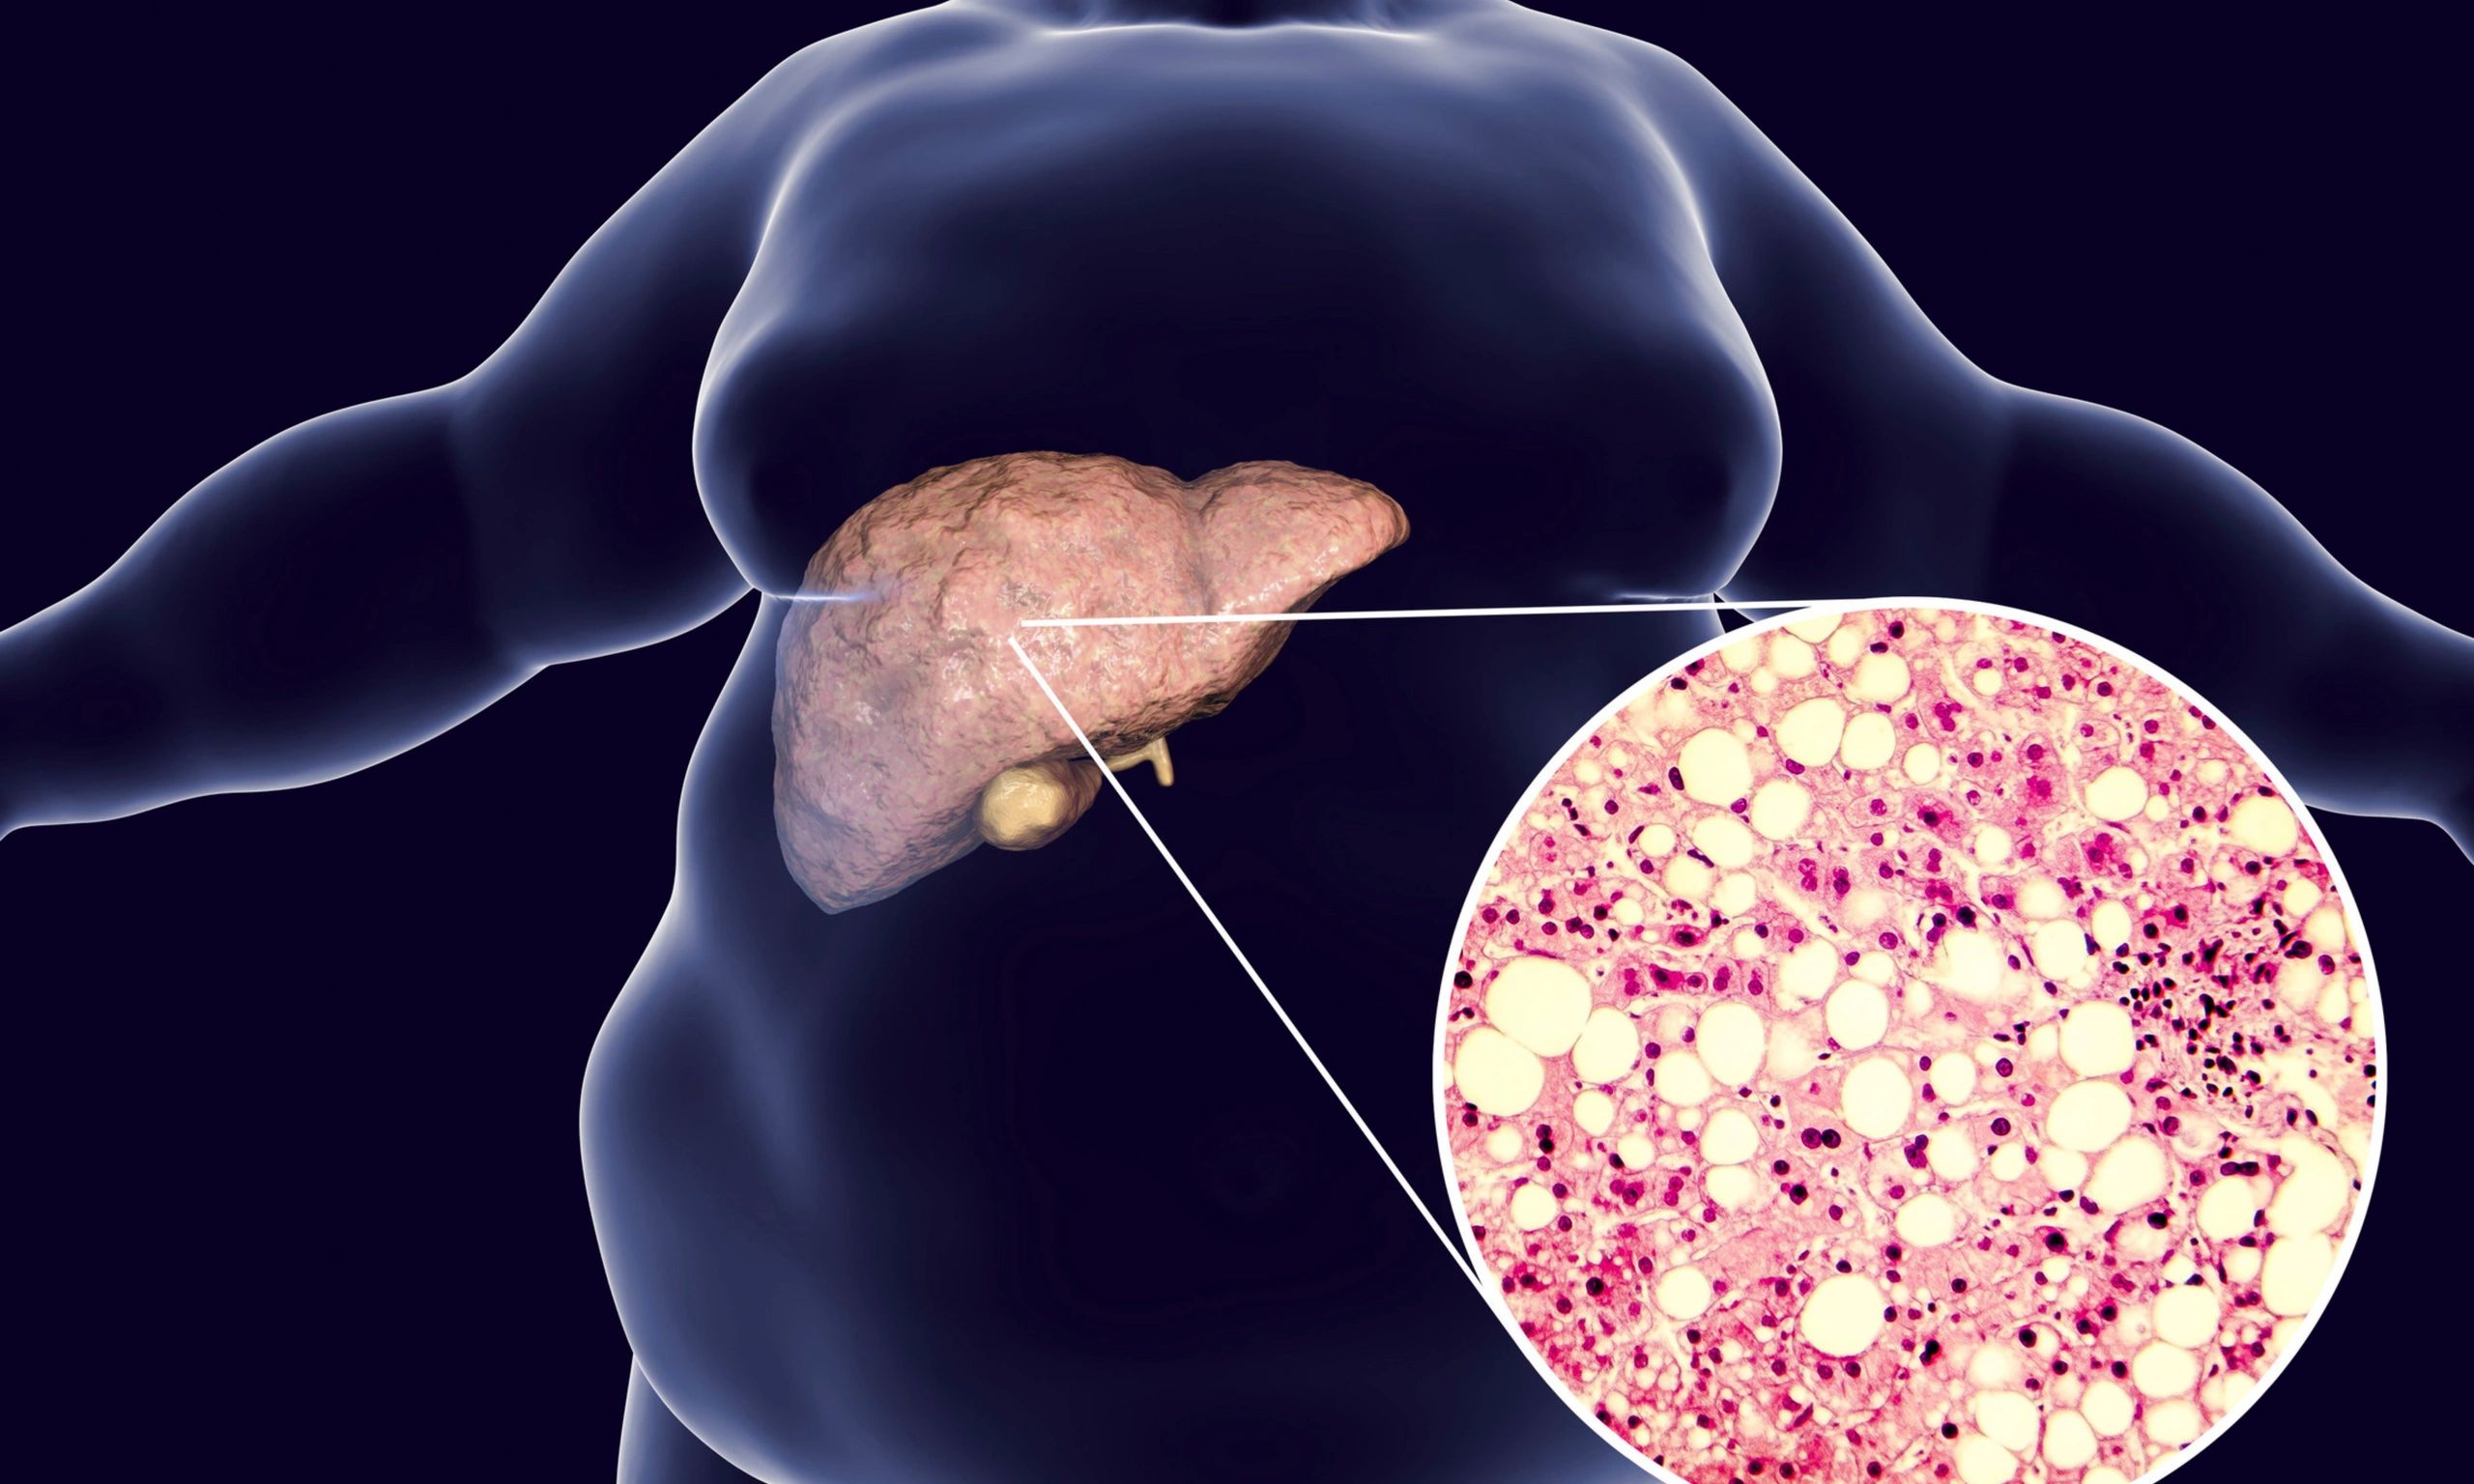 Liver health and weight management